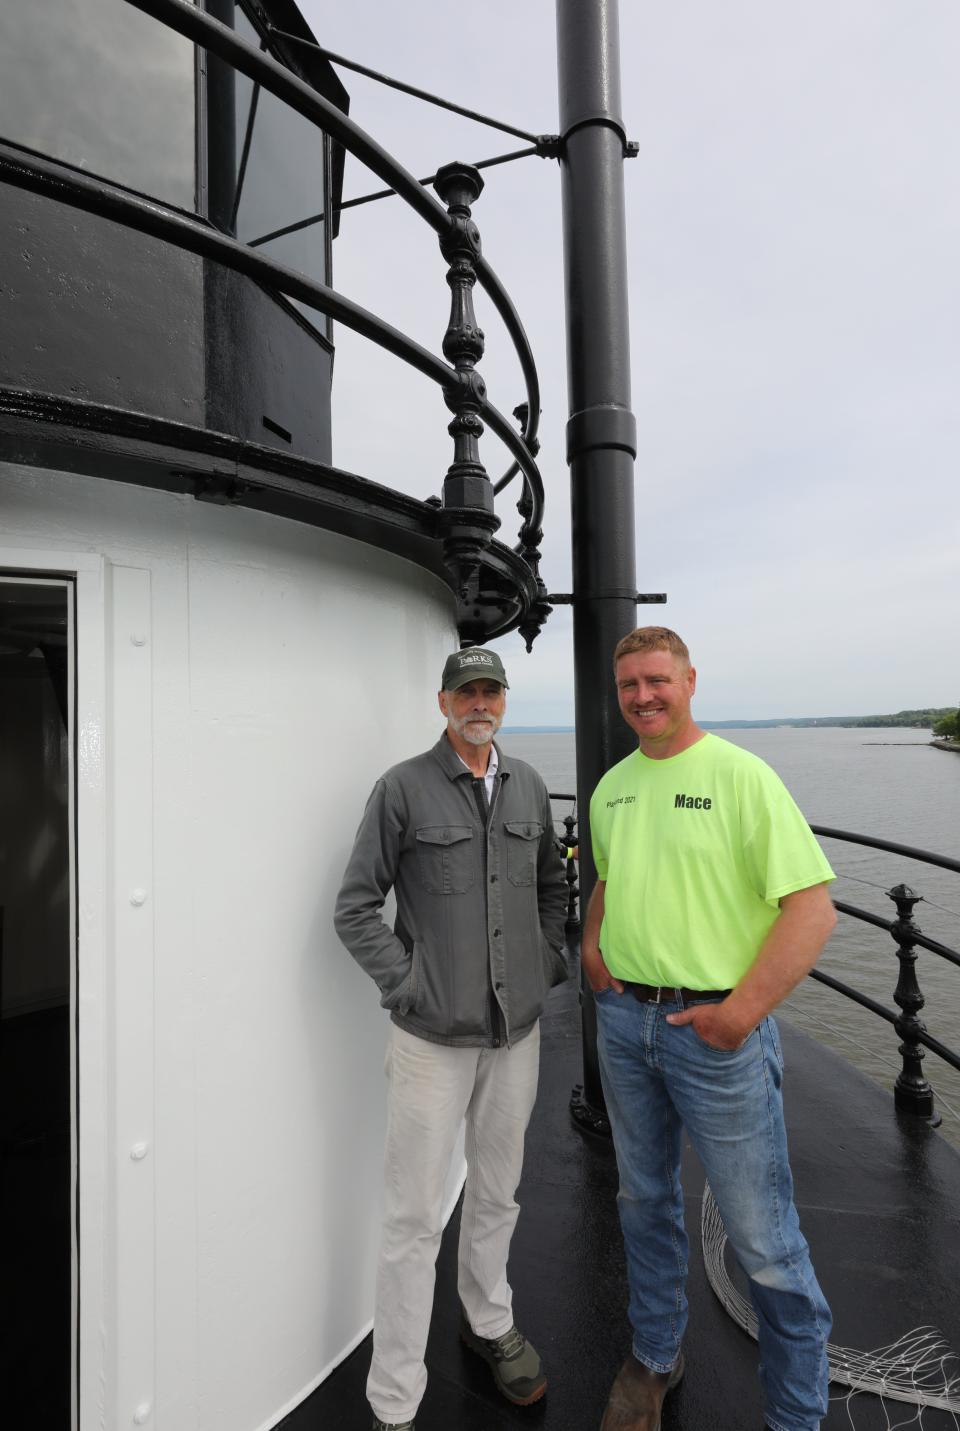 John Phillips, the curator, and Tom Soricelli, the foreman from Mace, are pictured on the gallery of the restored Tarrytown Lighthouse in Sleepy Hollow, May 17, 2024.